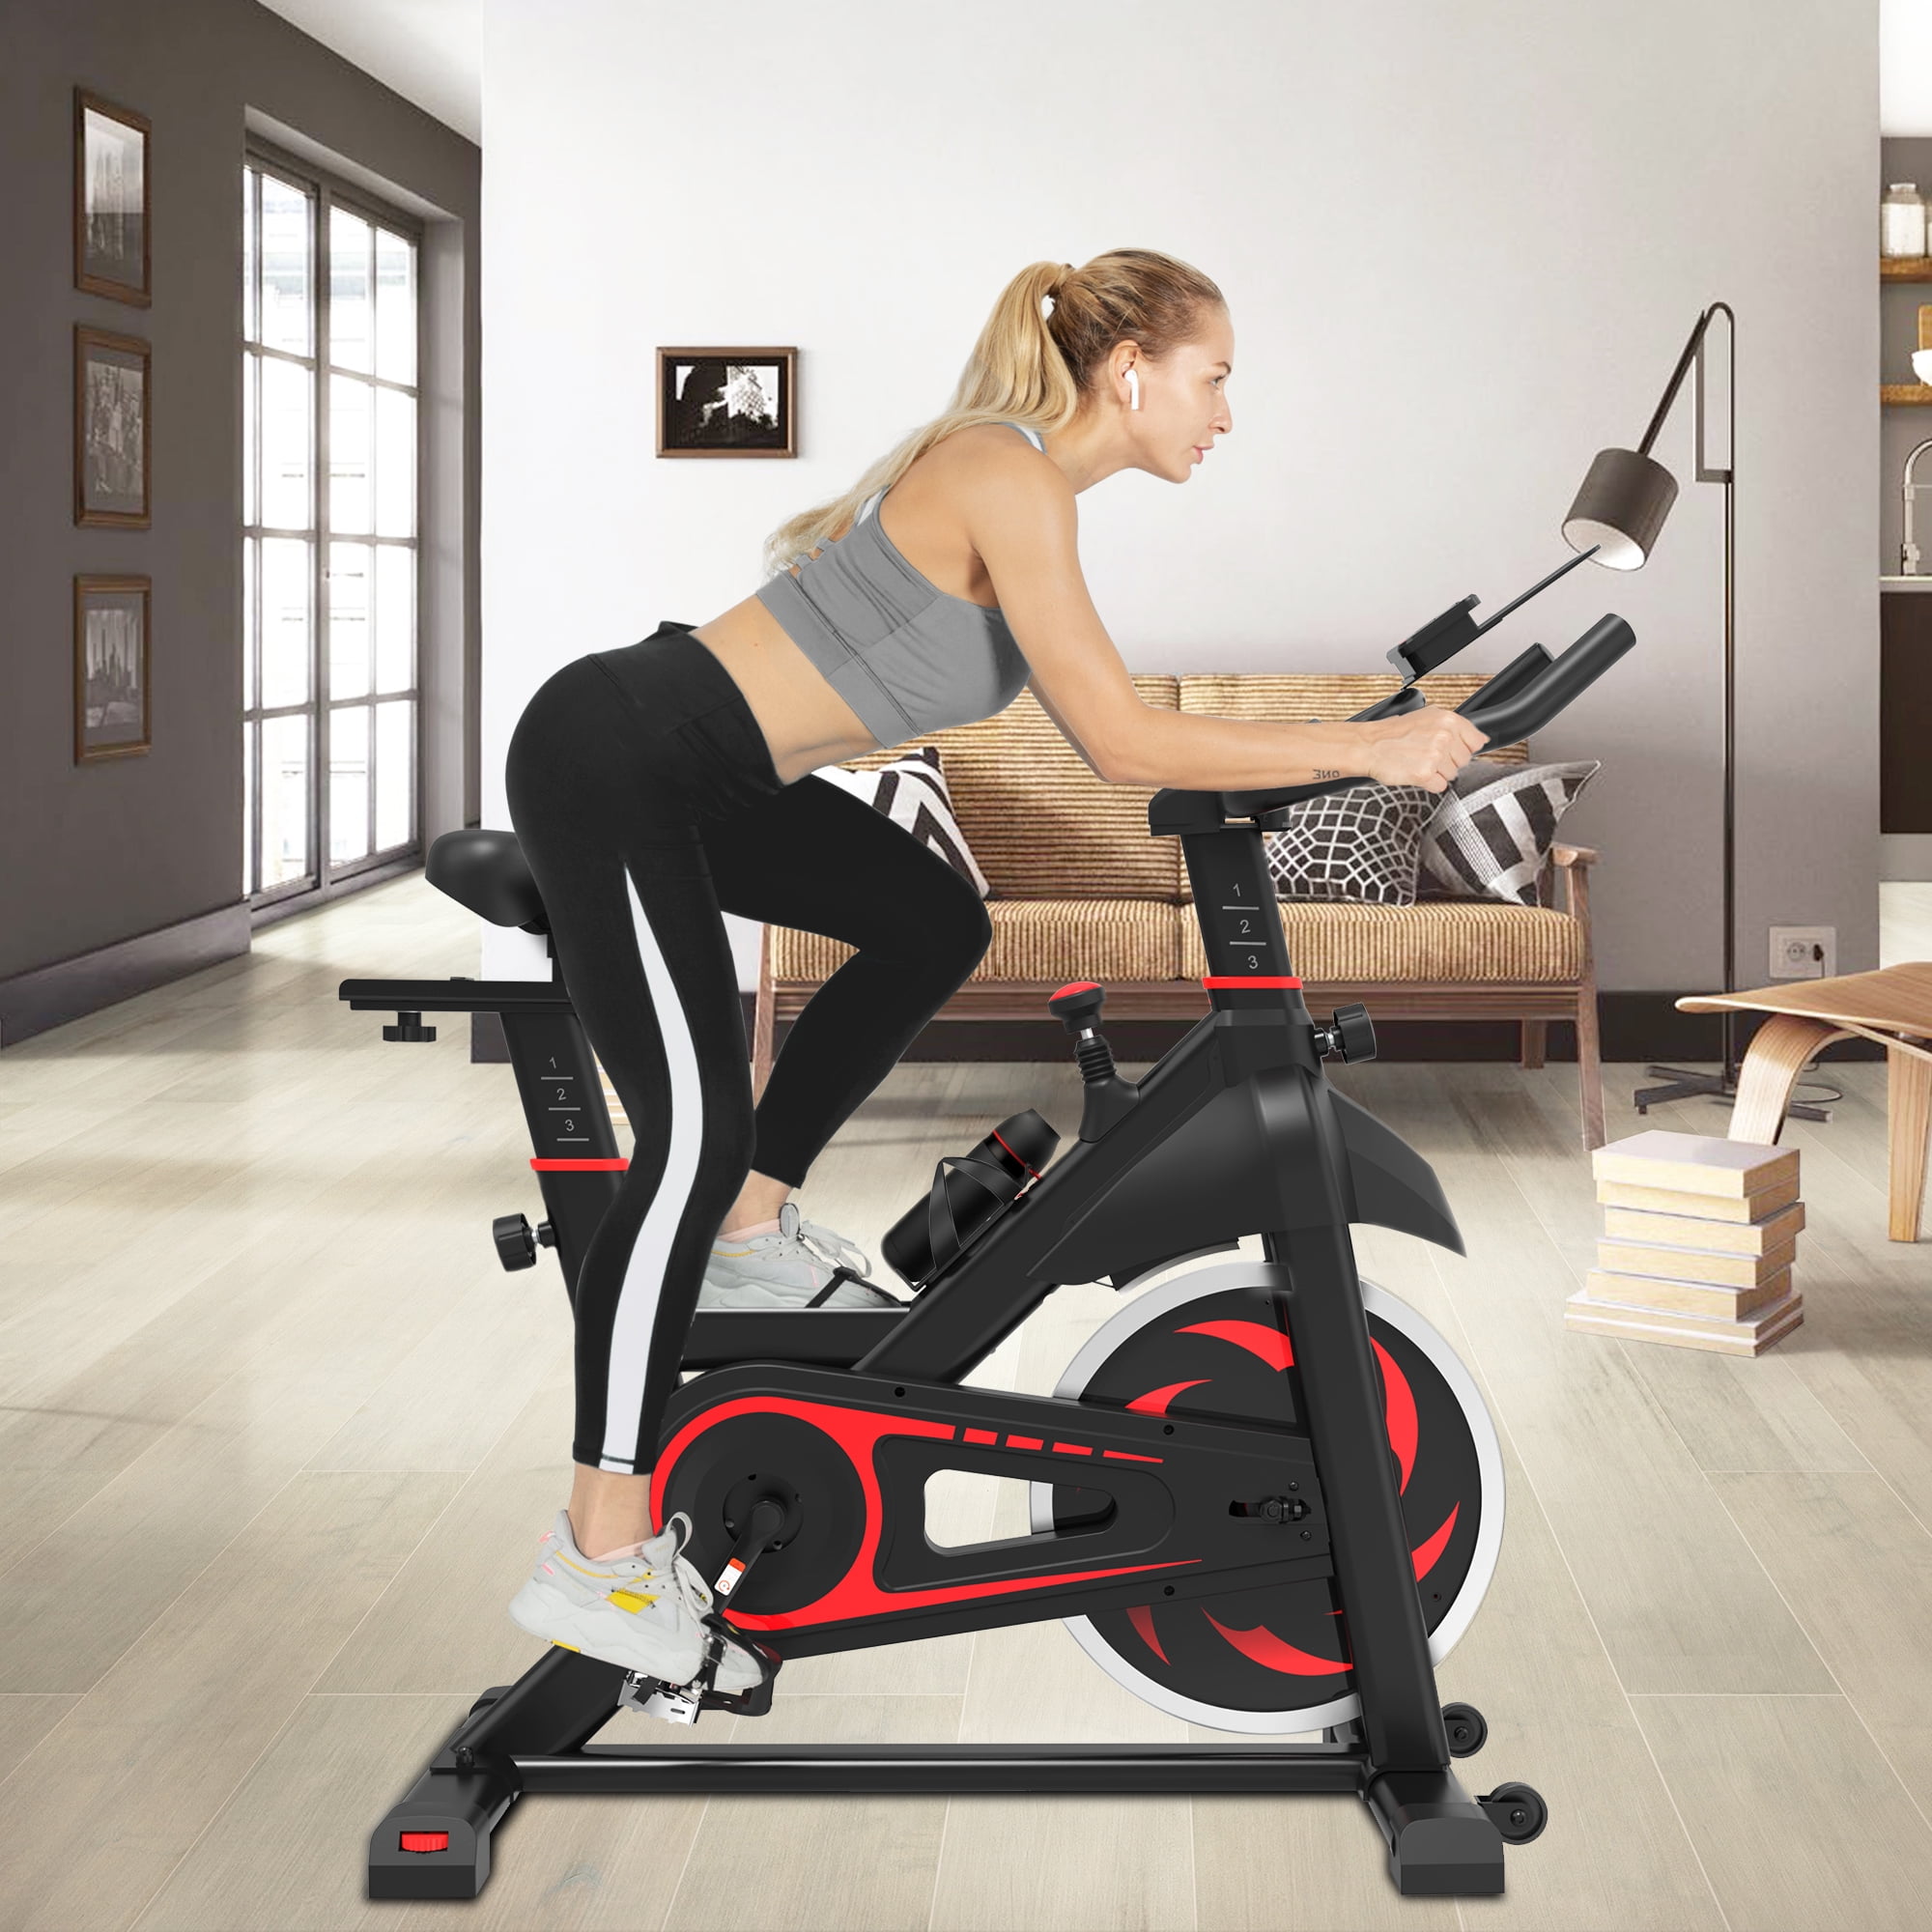 Fitness Workout Gym & Home Indoor Exercise Bike Stationary Bicycle Cardio 